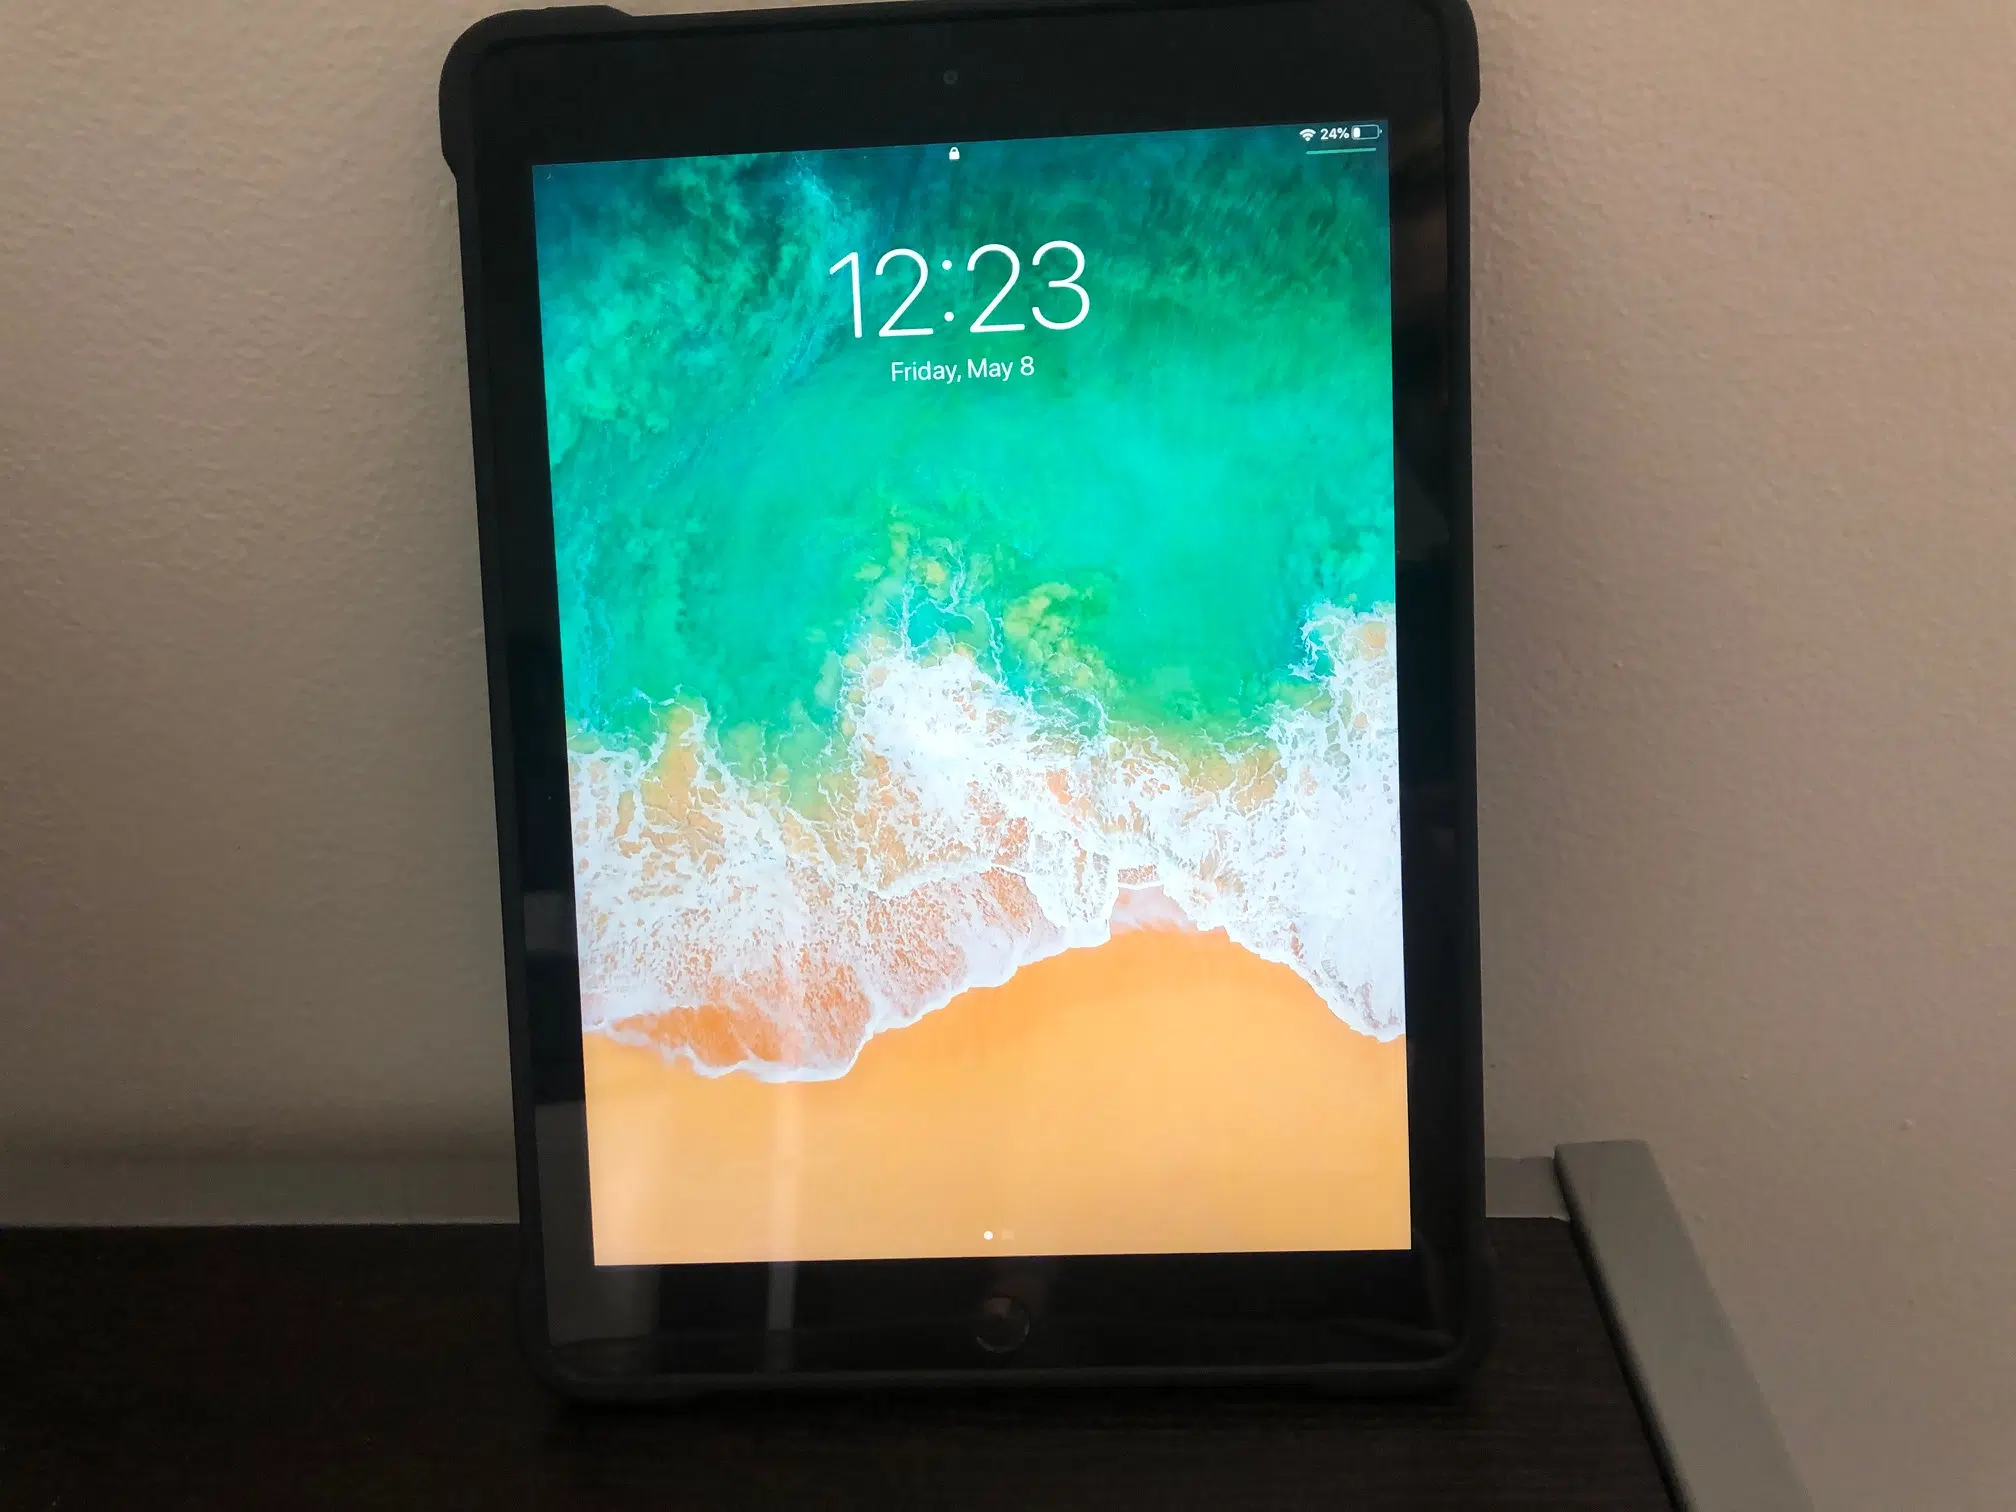 Westcap donating money for iPads to help long-term care residents reconnect with loved ones